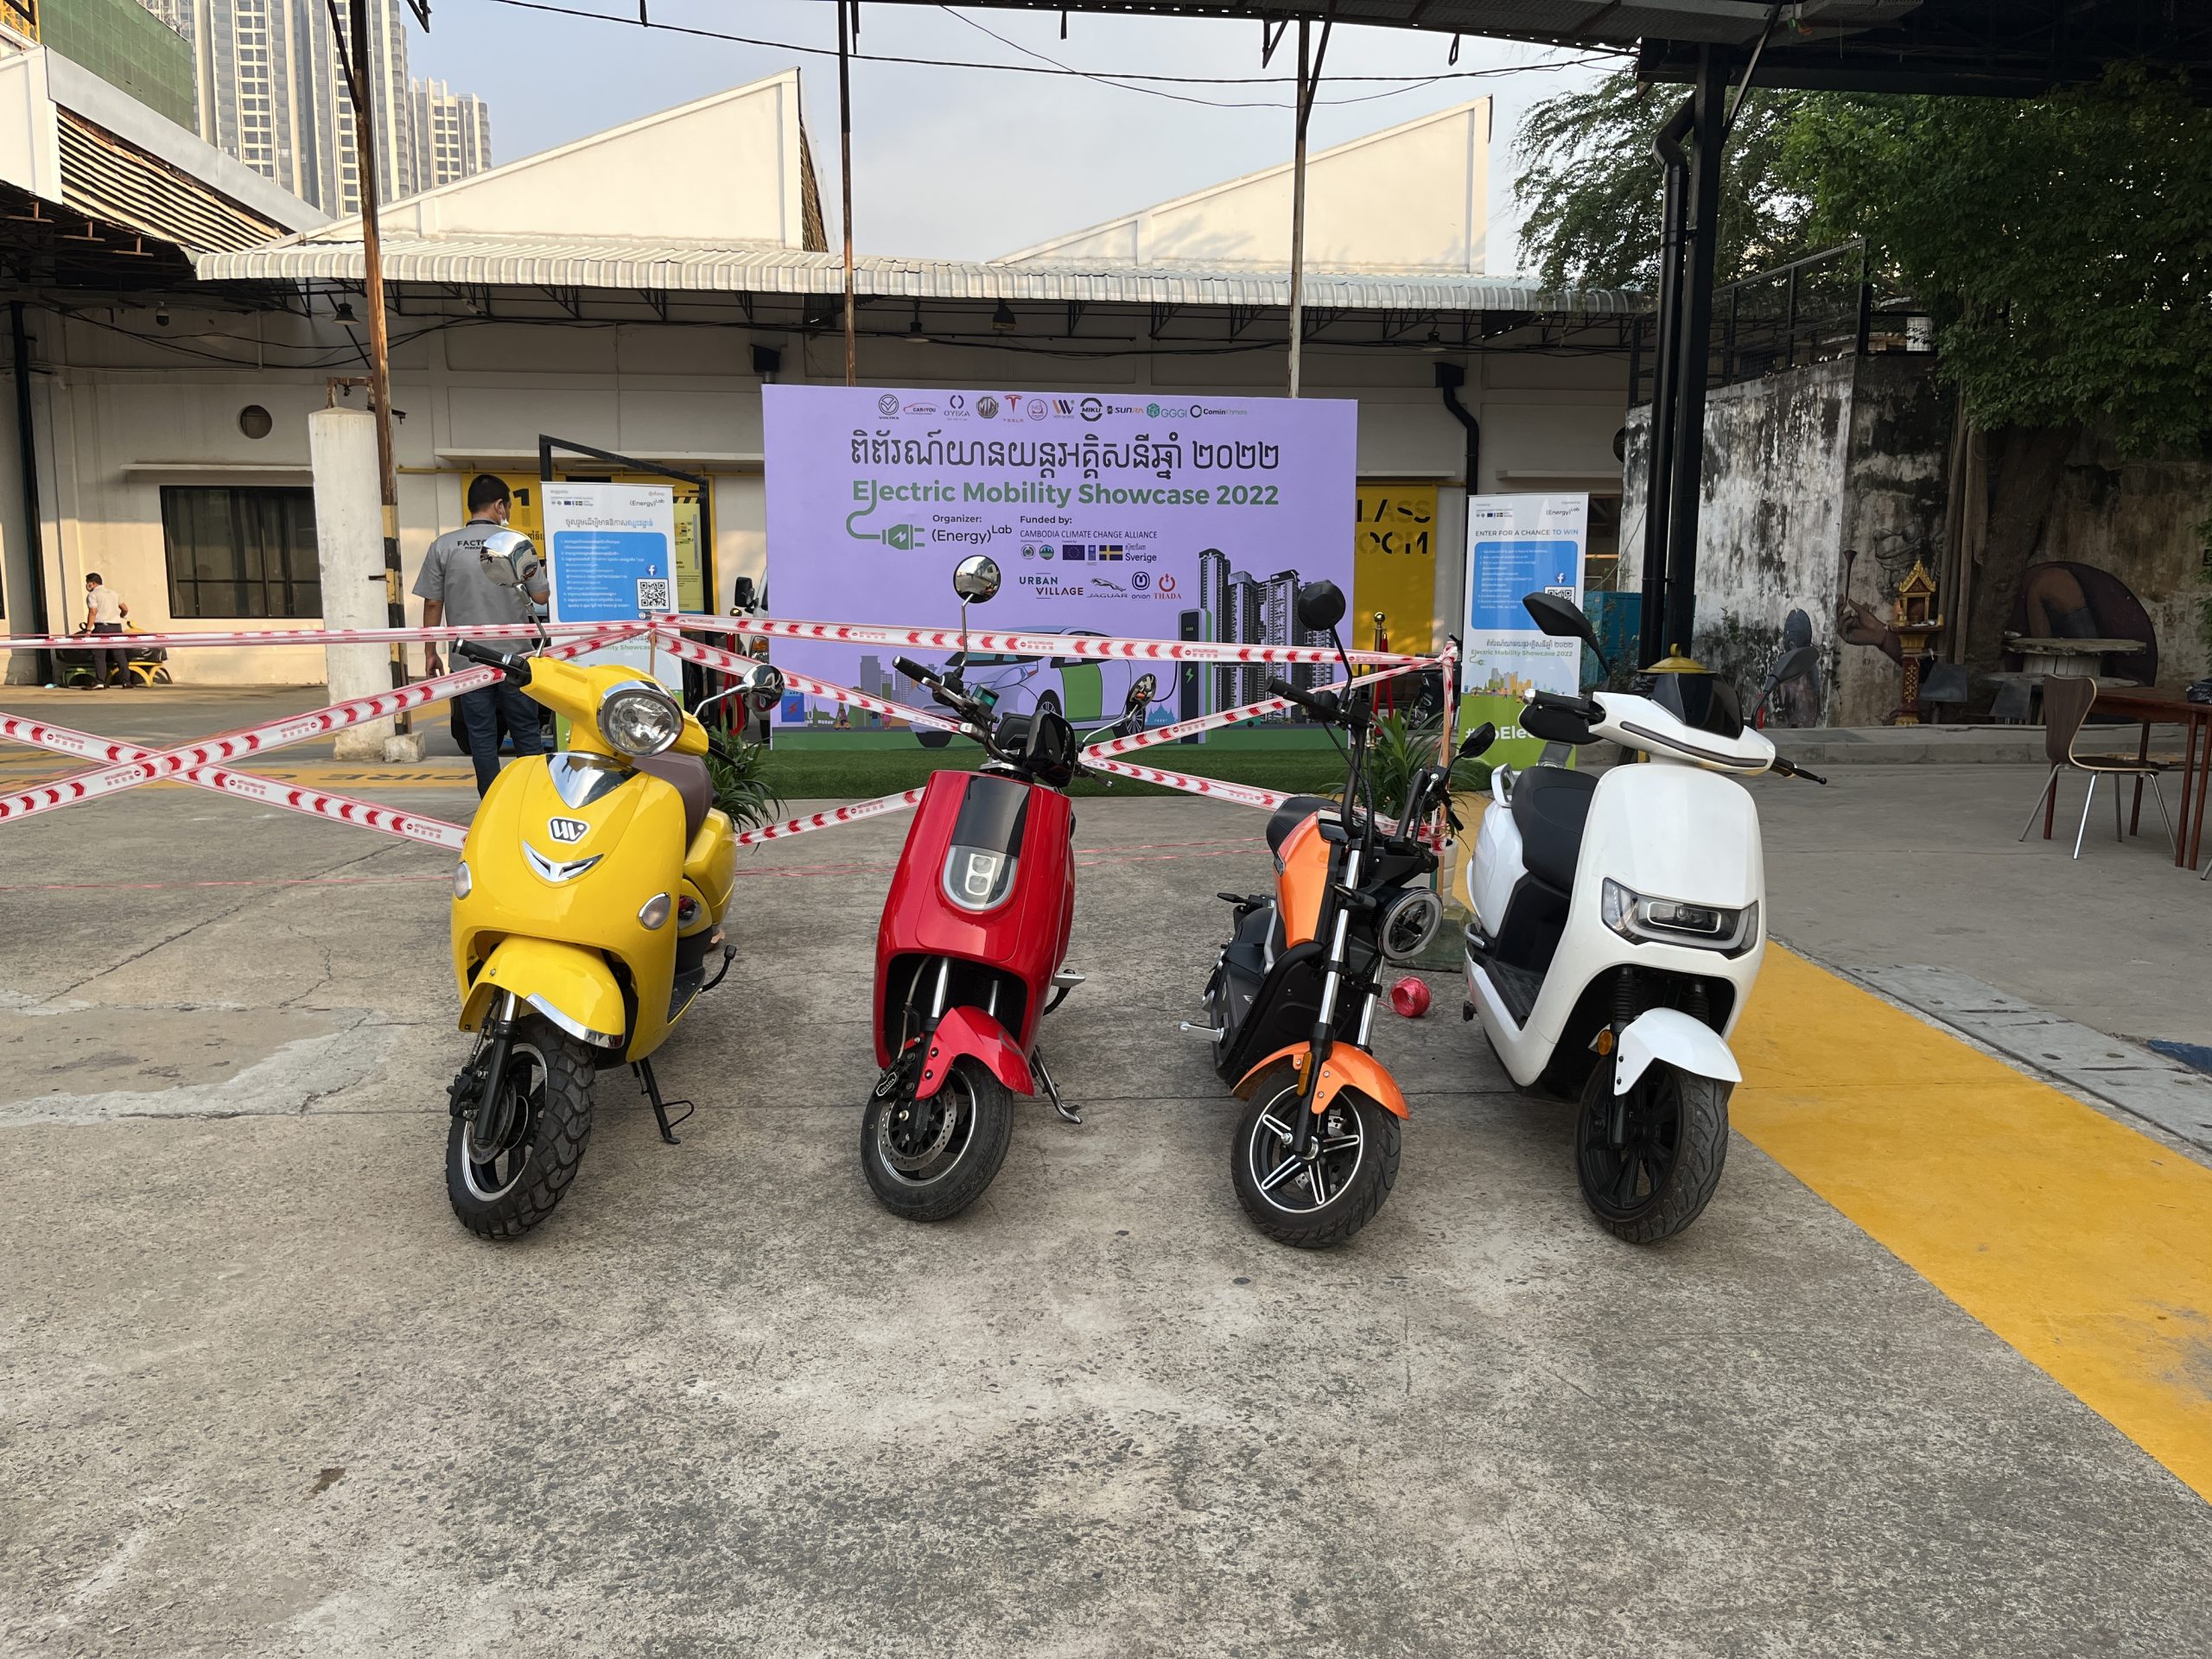 EV products on show in Phnom Penh